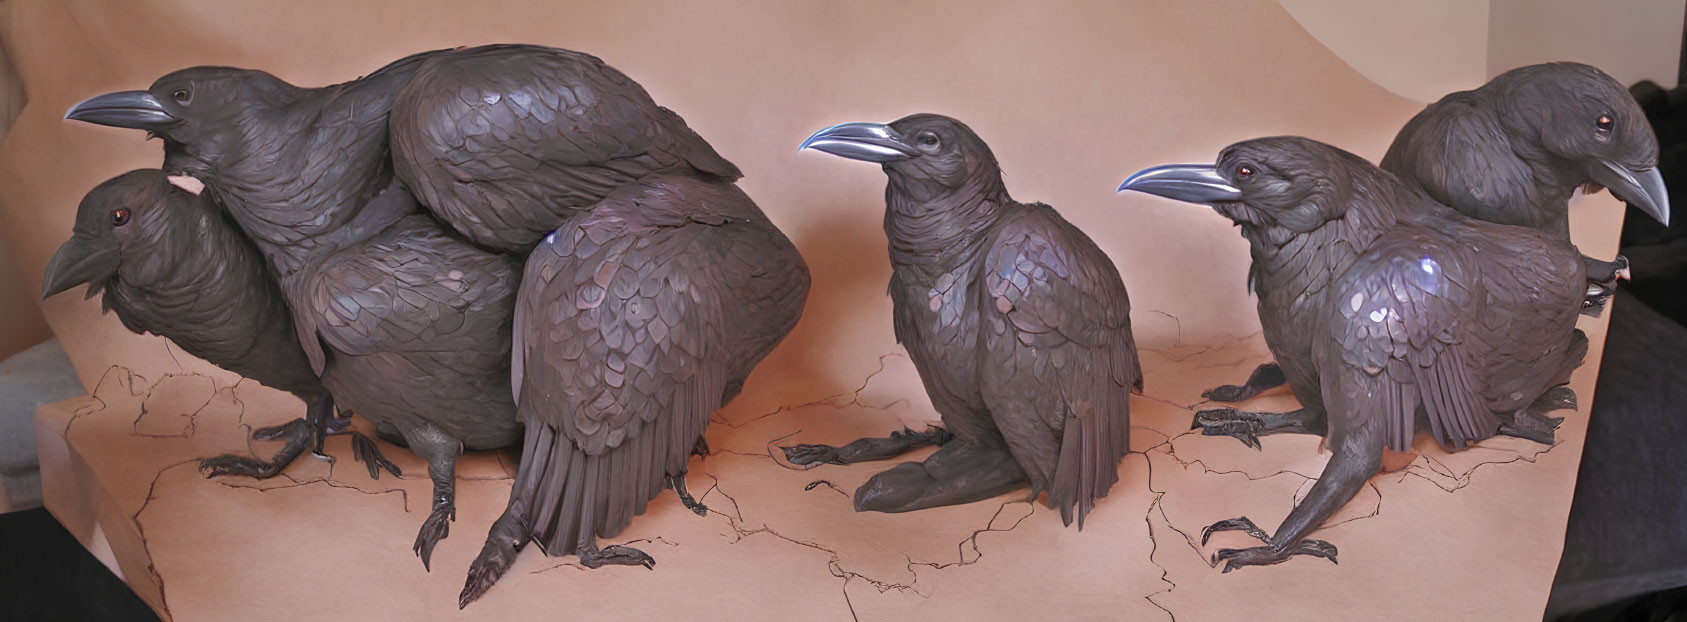 Panoramic artwork featuring five crows on cracked surface